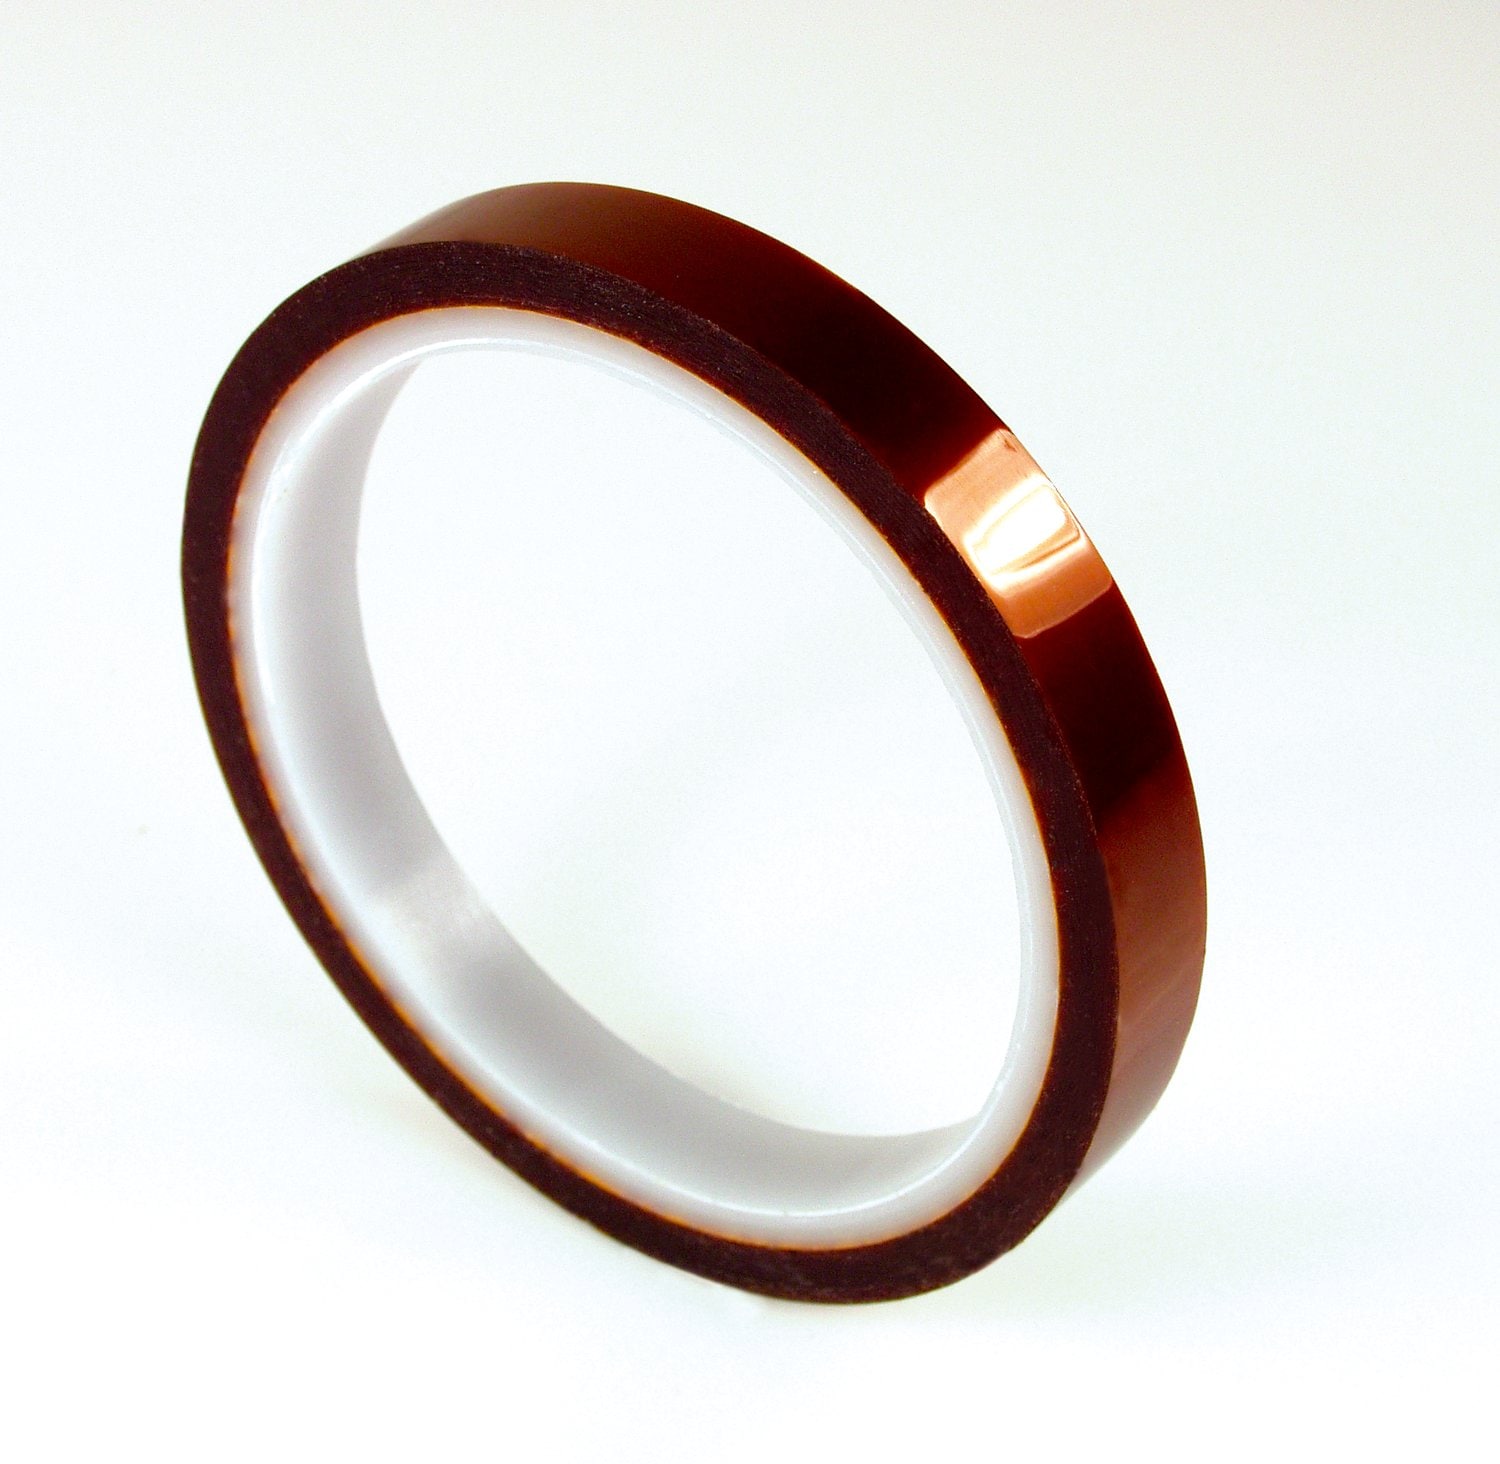 7000132180 - 3M Polyimide Film Electrical Tape 92, Amber, Silicone Adhesive, 1 mil
film, 1/2 in x 36 yd (12,70 mm x 33 m), 18/Case